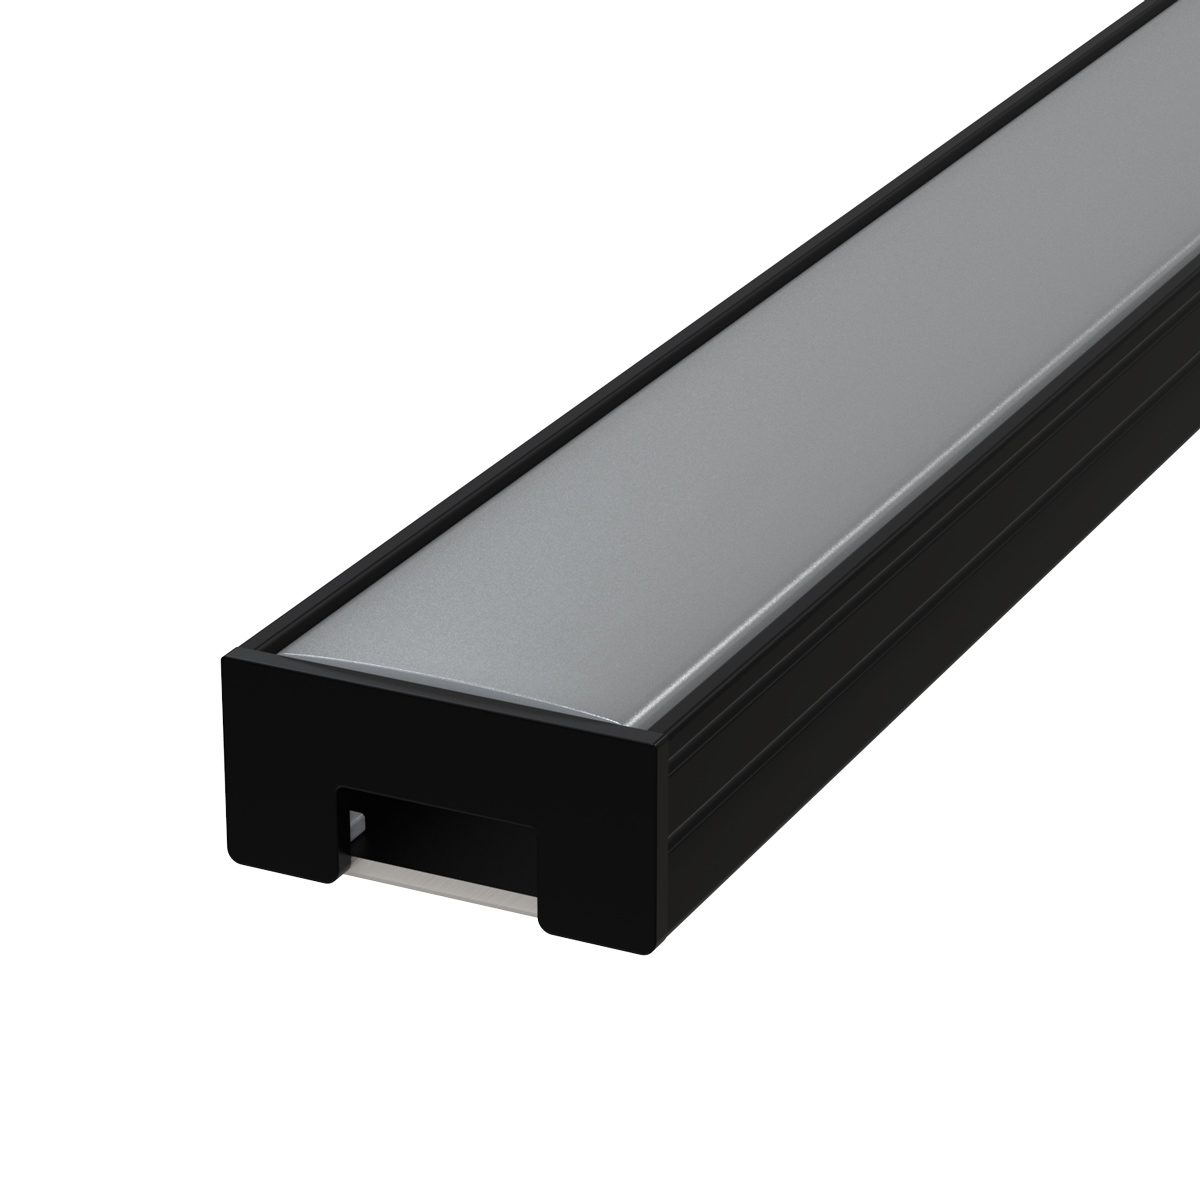 View 1m LED Profile Black Slimline With Diffuser With End Caps Brackets information